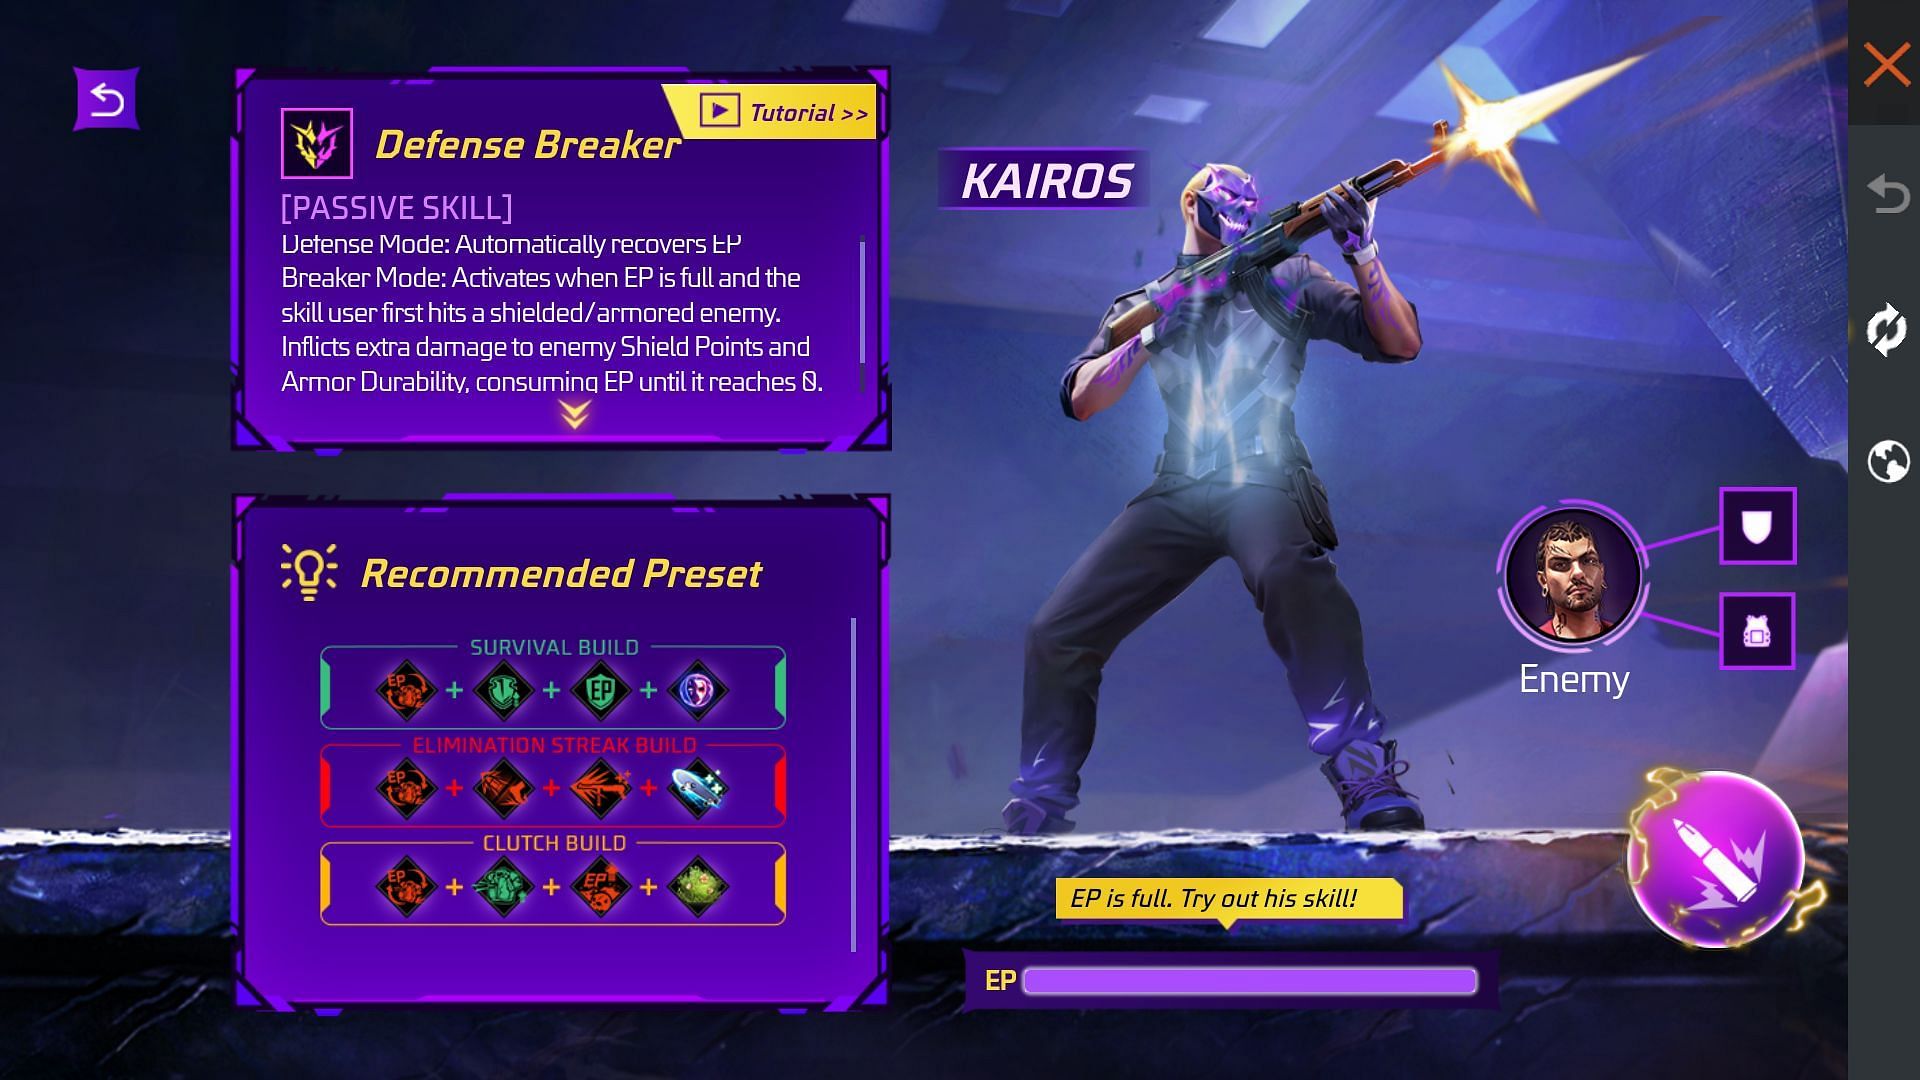 Details of Kairos character in Free Fire (Image via Garena)